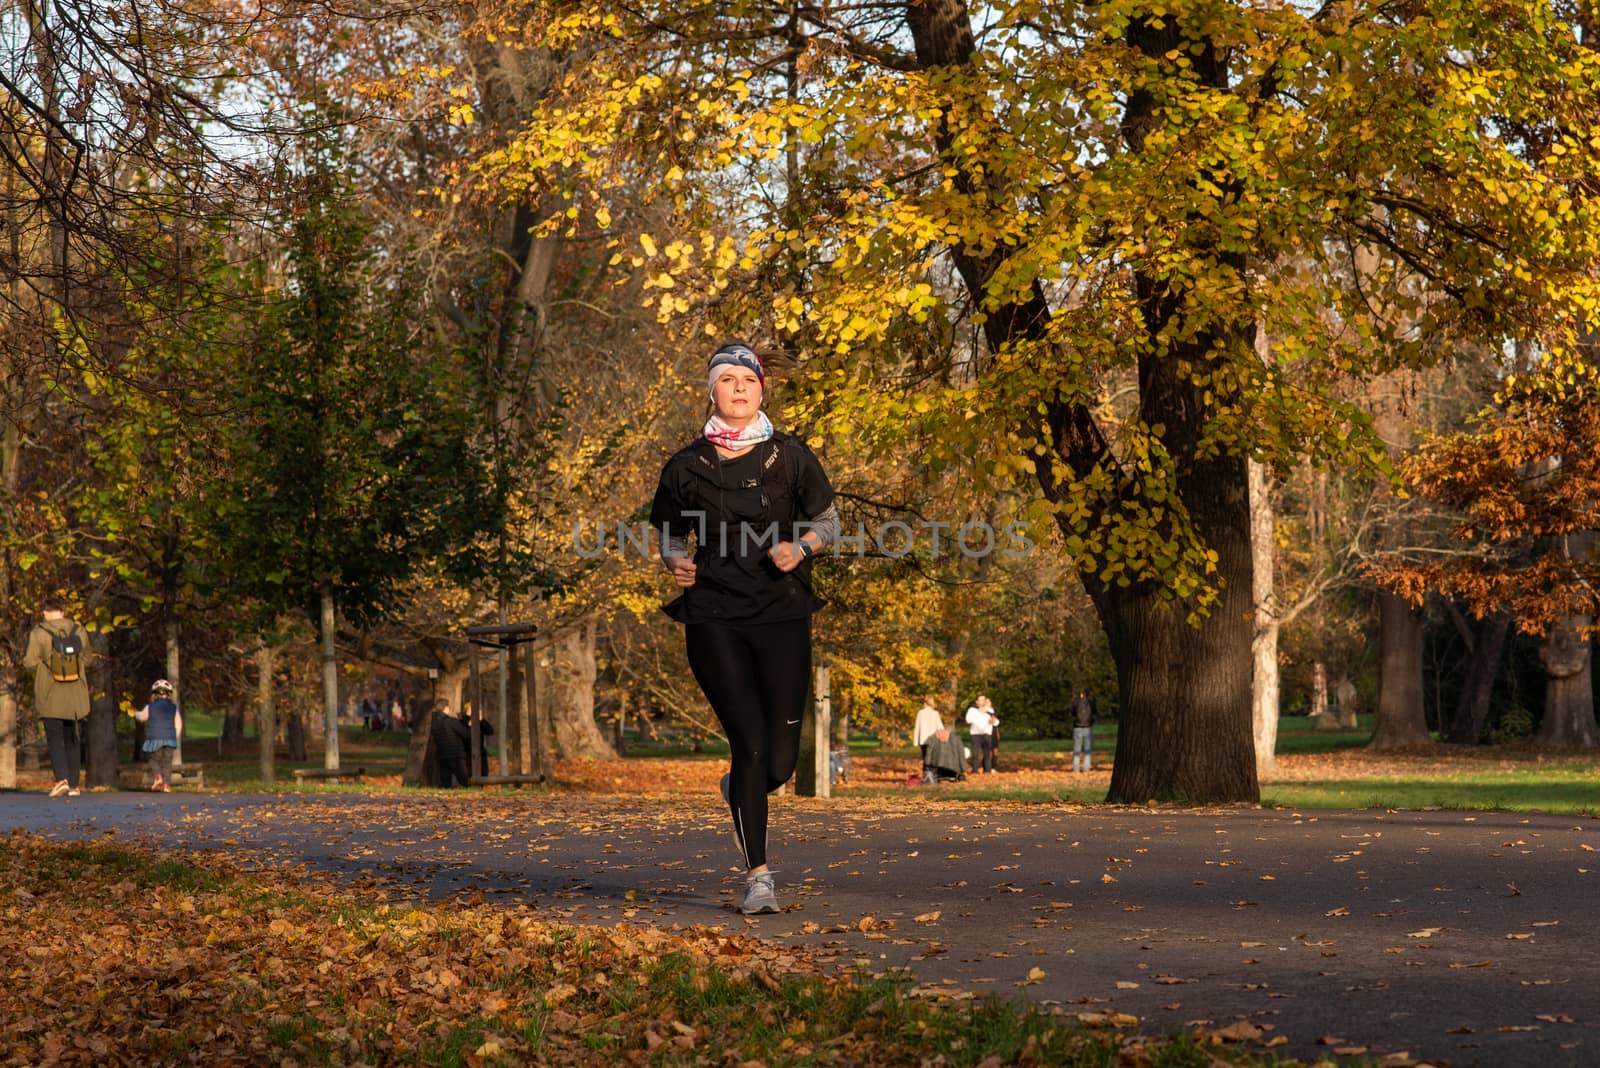 11/14/2020. Park Stromovka. Prague czech Republic. A woman is running in the park on a Sunday winter day.